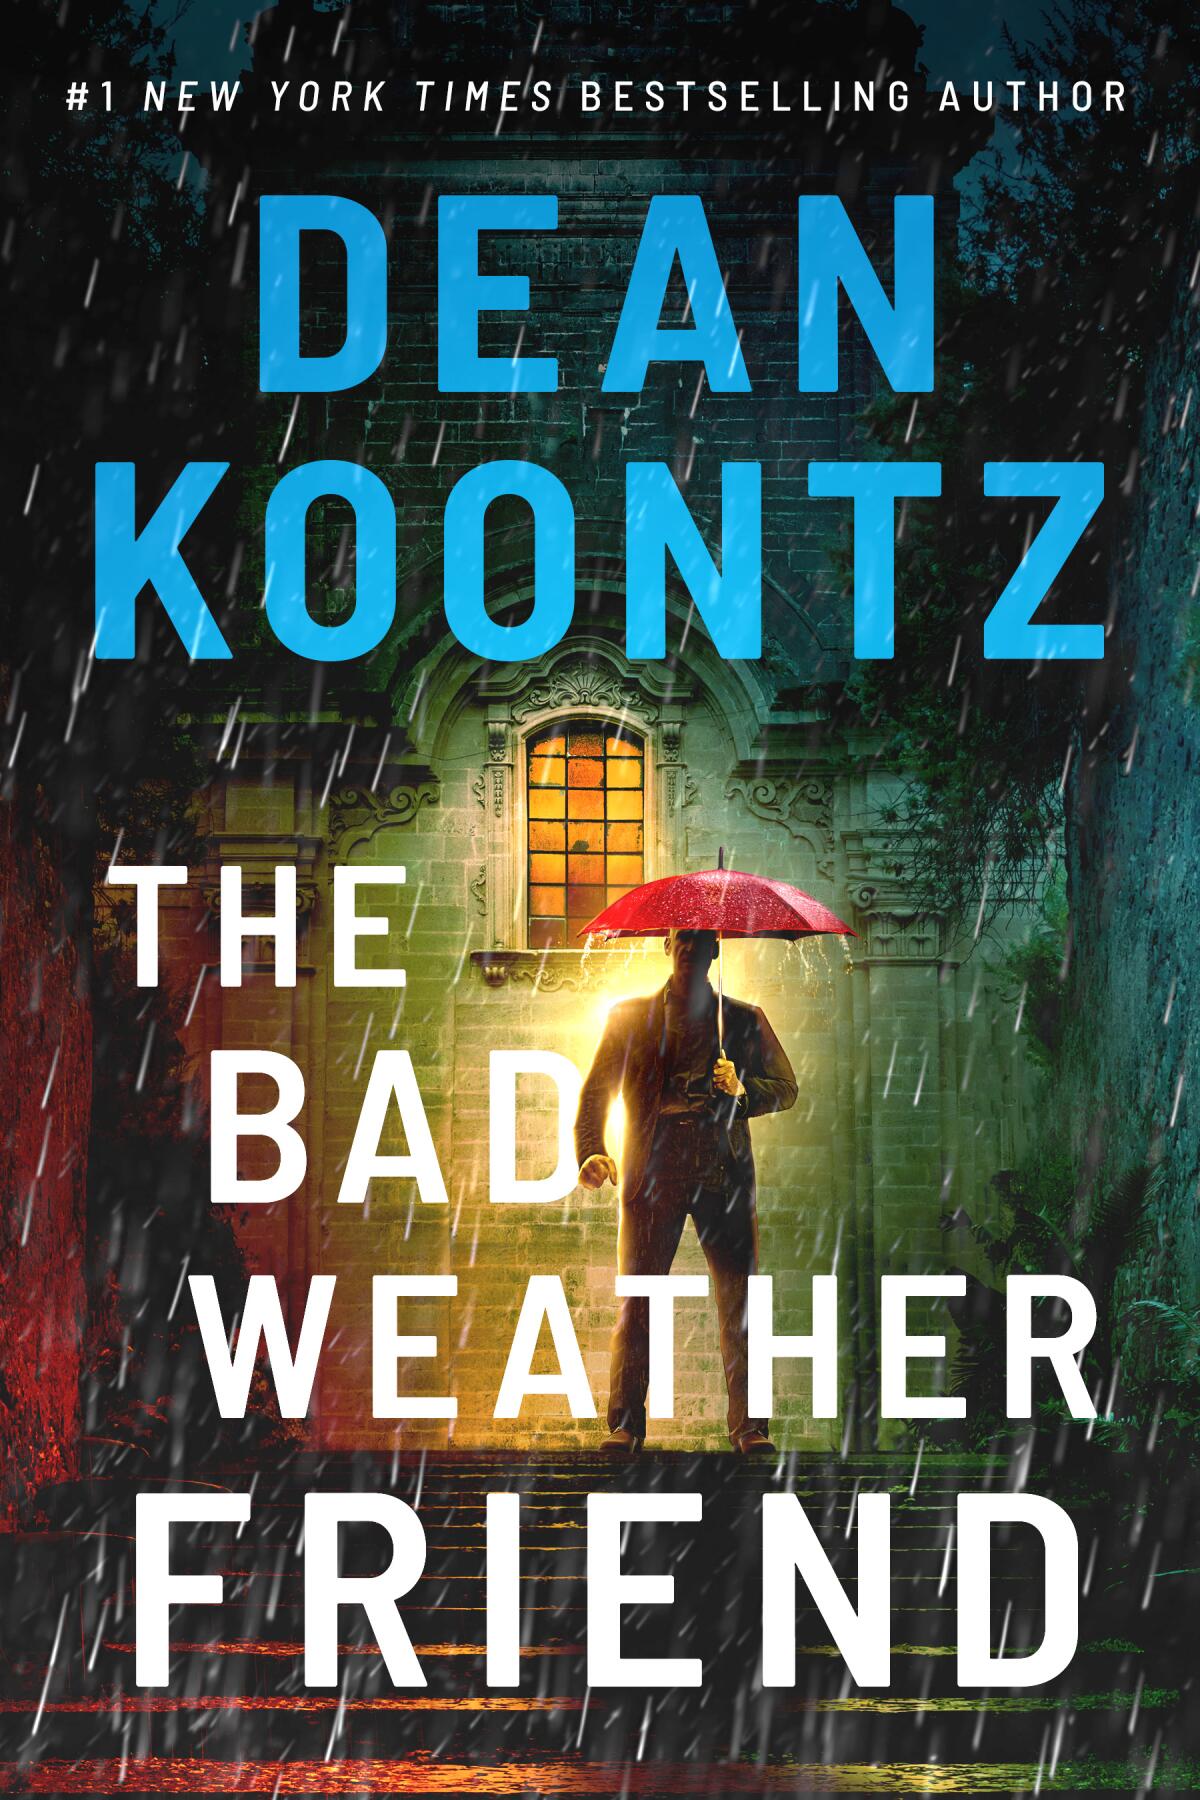 Book cover for "The Bad Weather Friend" by bestselling author Dean Koontz.